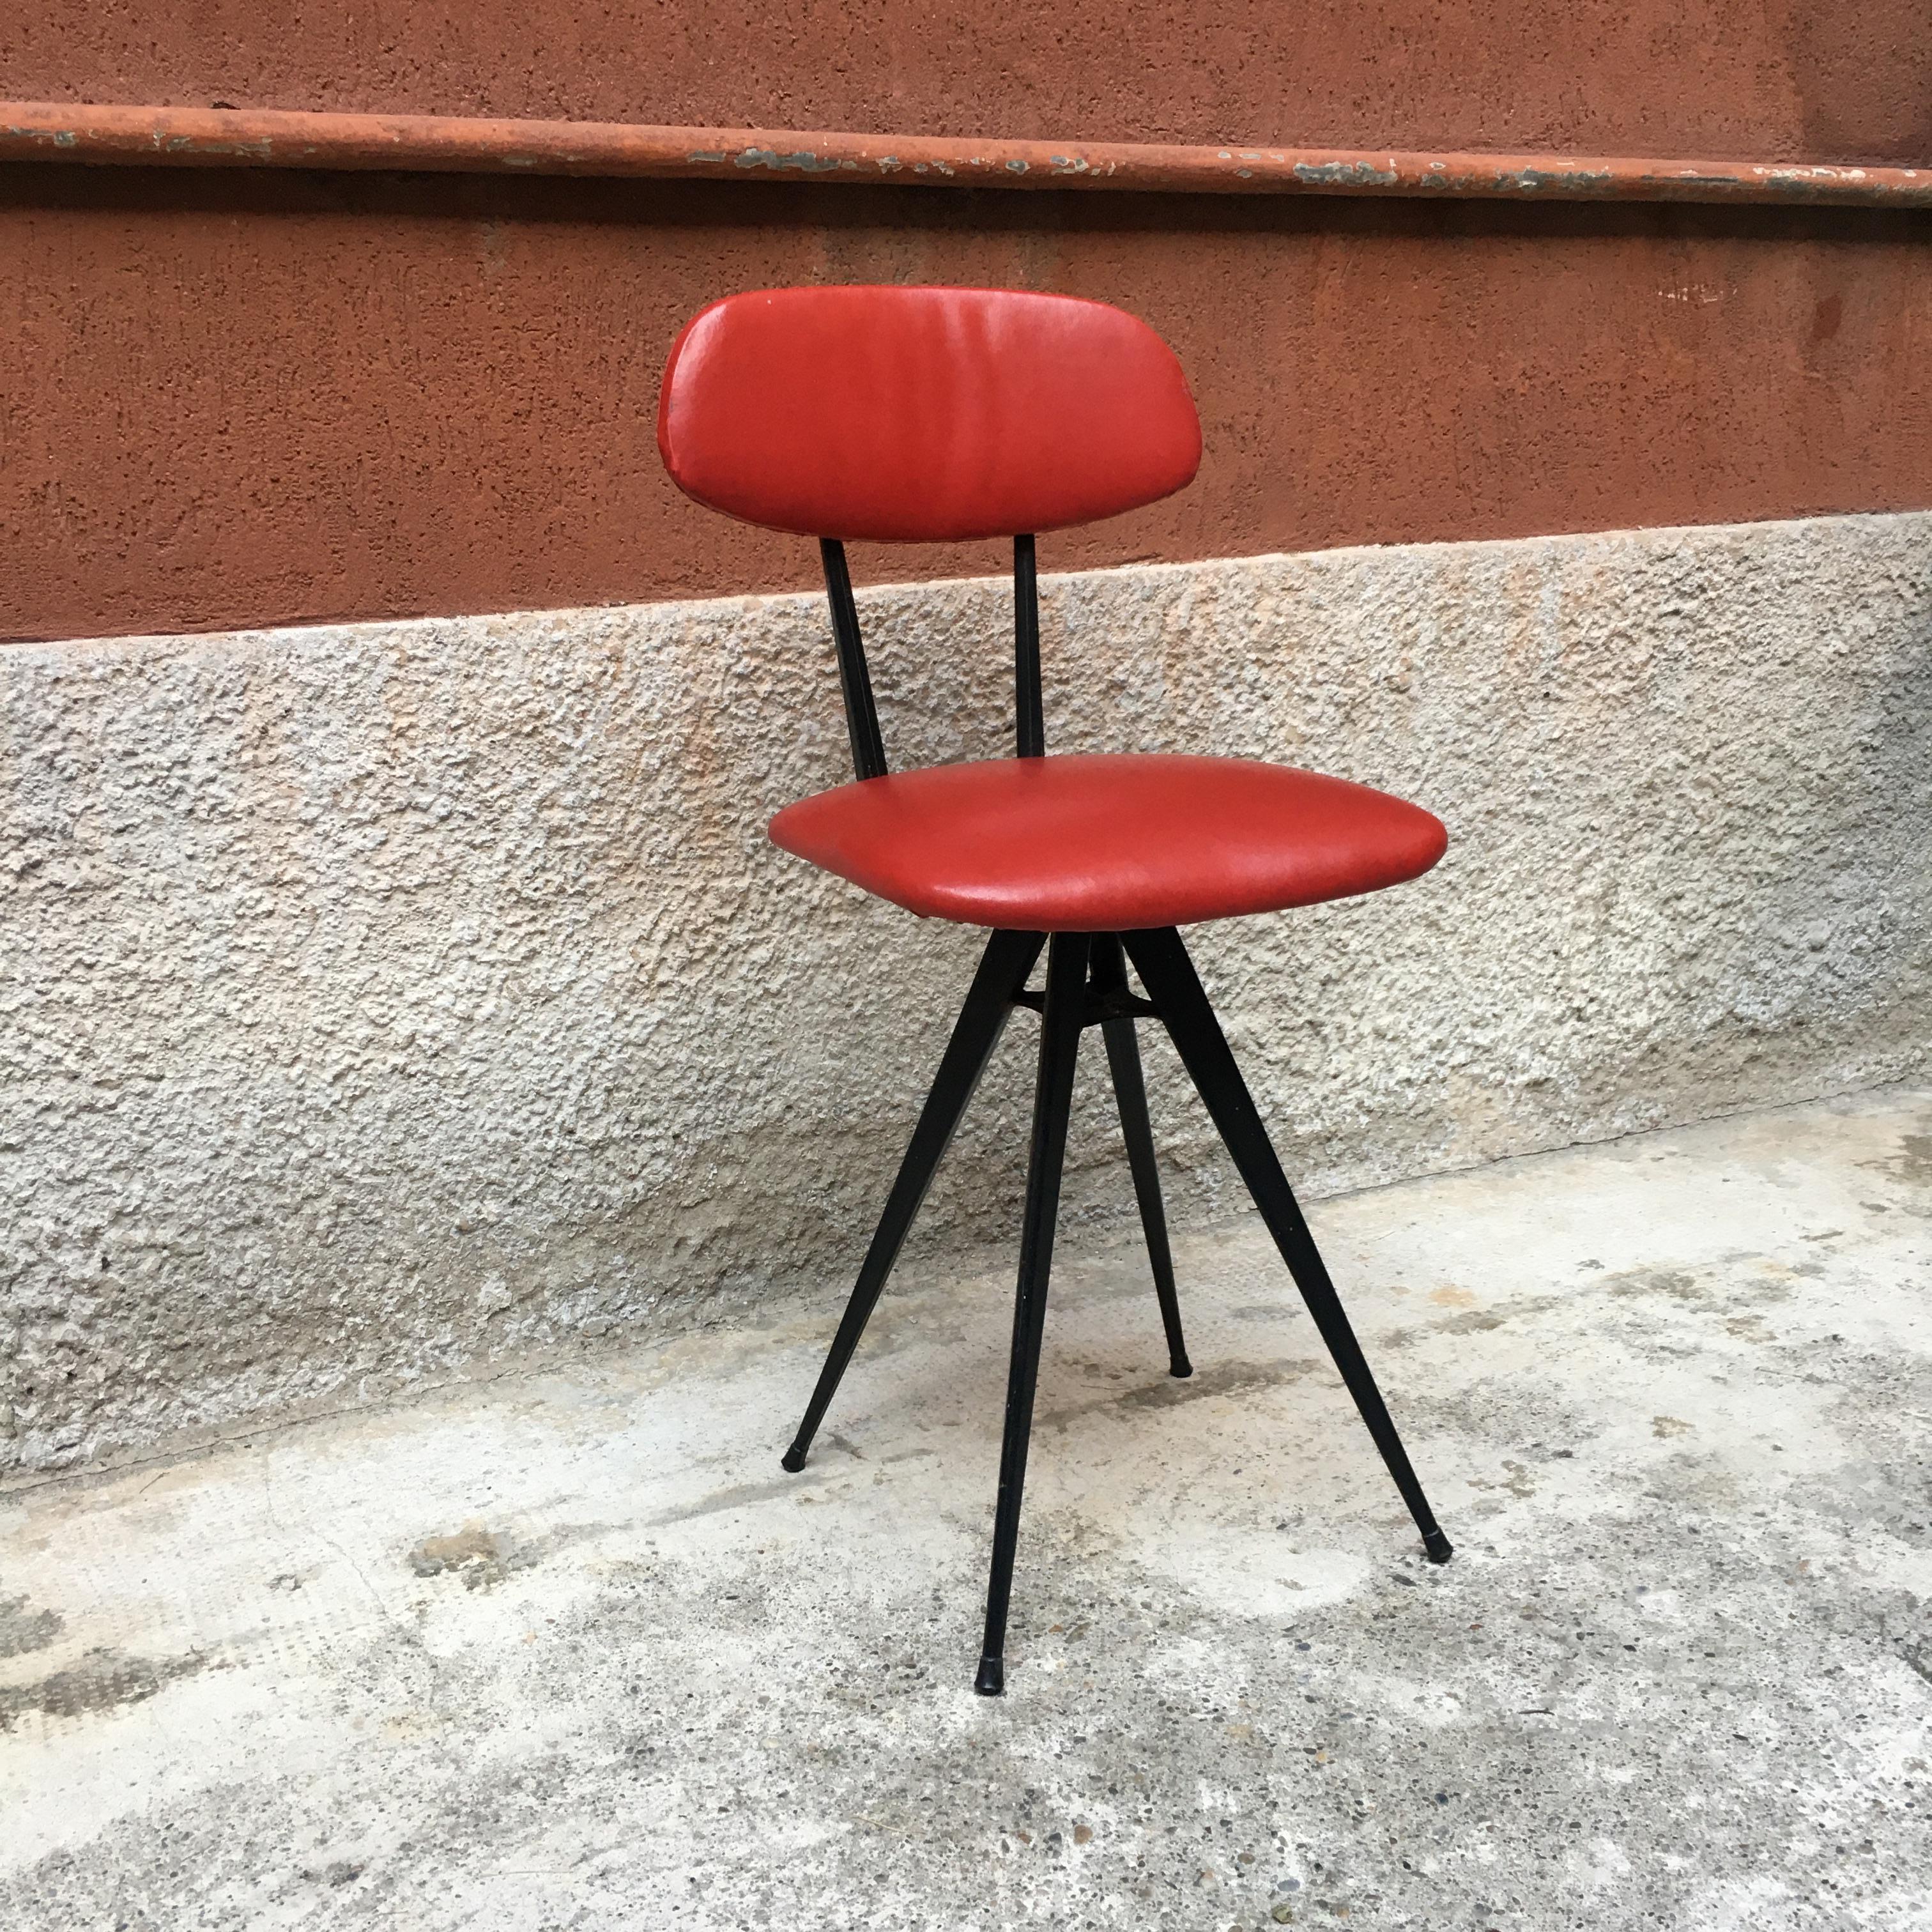 Italian Red Leatherette and Metal Legs Chairs, 1960s (Metall)